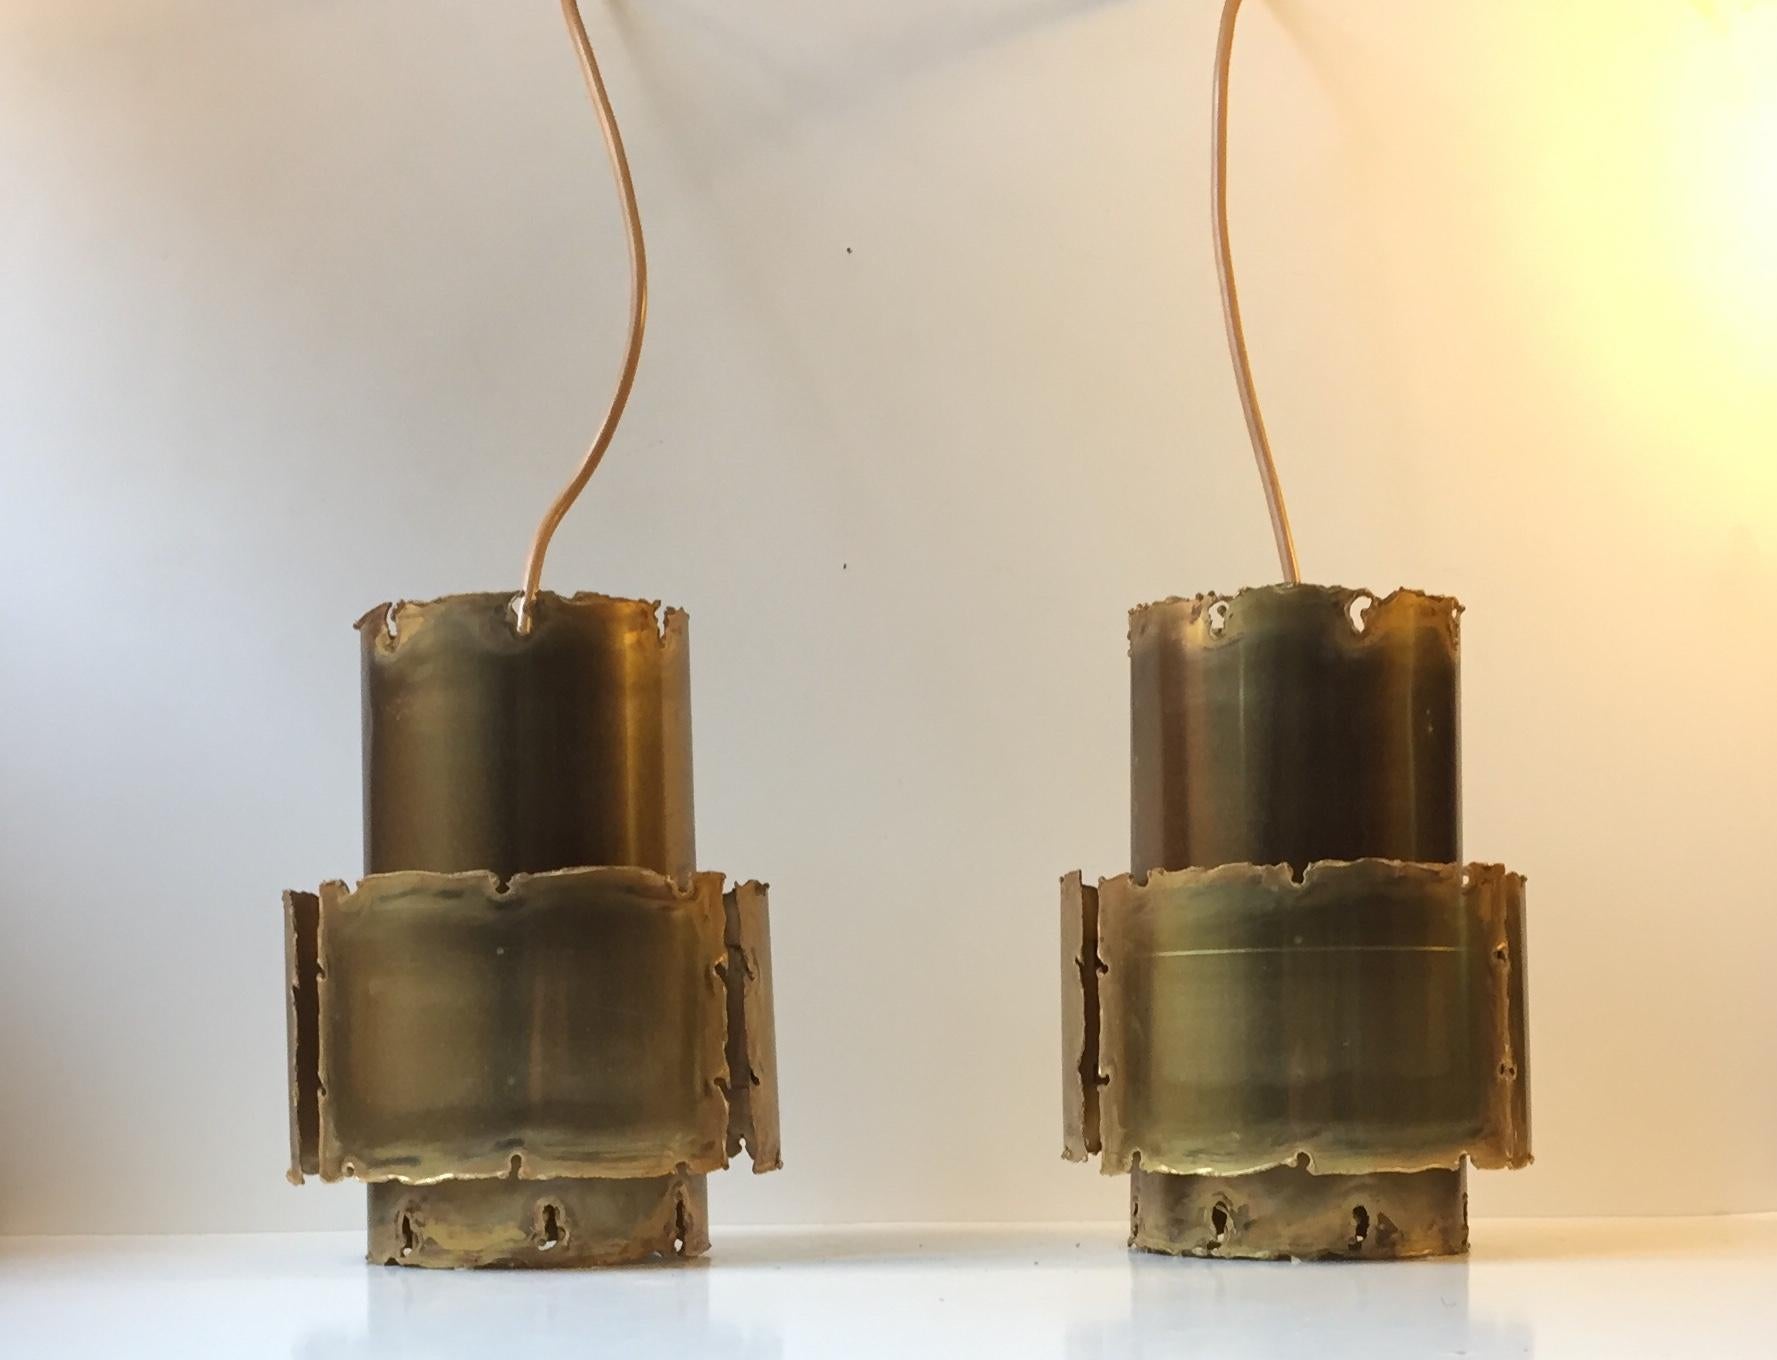 A pair of Brutalist acid treated and torch-cut pendants was designed by Svend Aage Holm Sørensen in the early 1960s. Manufactured by Holm Sørensen in Denmark. The price is for the pair.